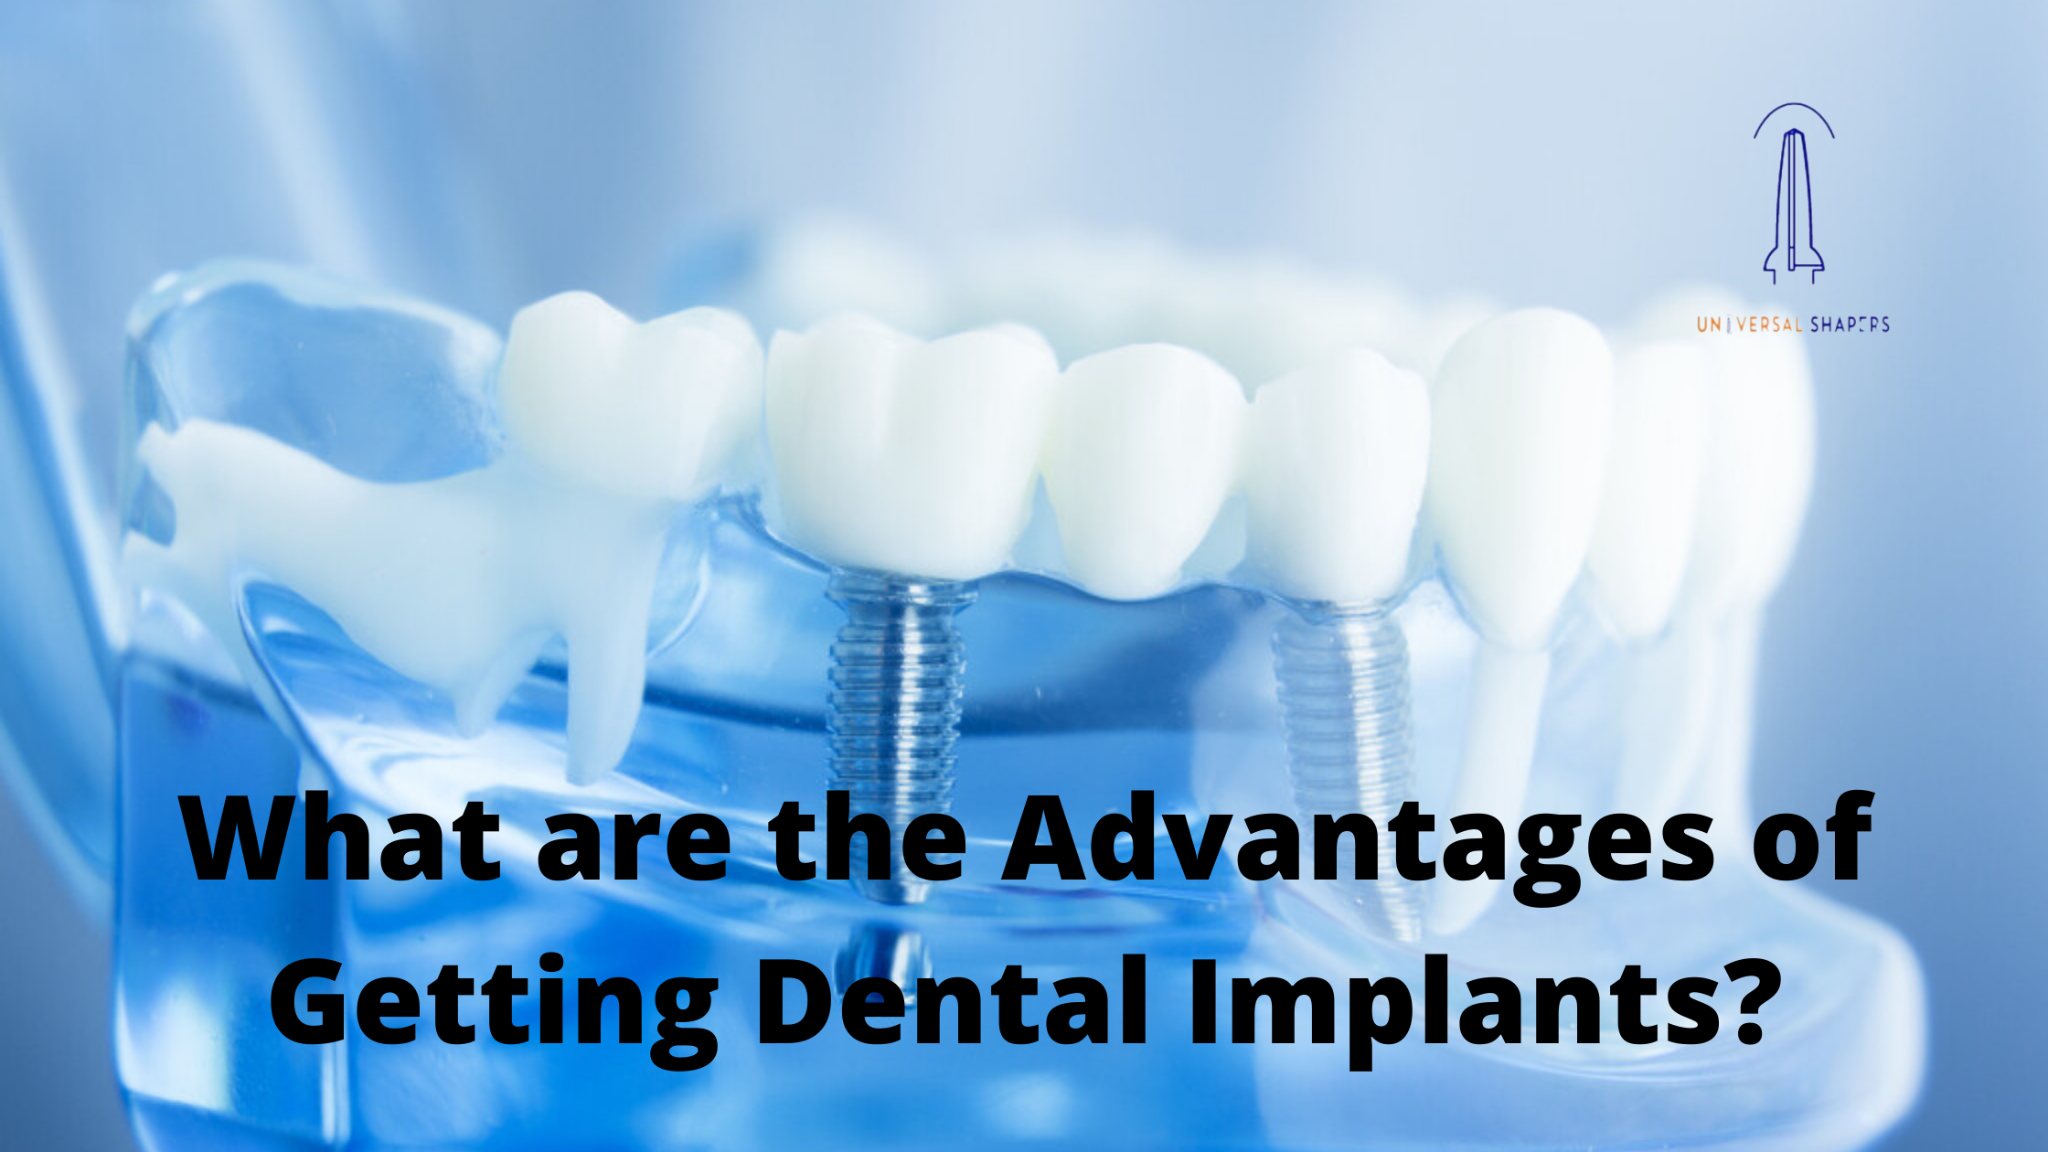 What are the Advantages of Getting Dental Implants?